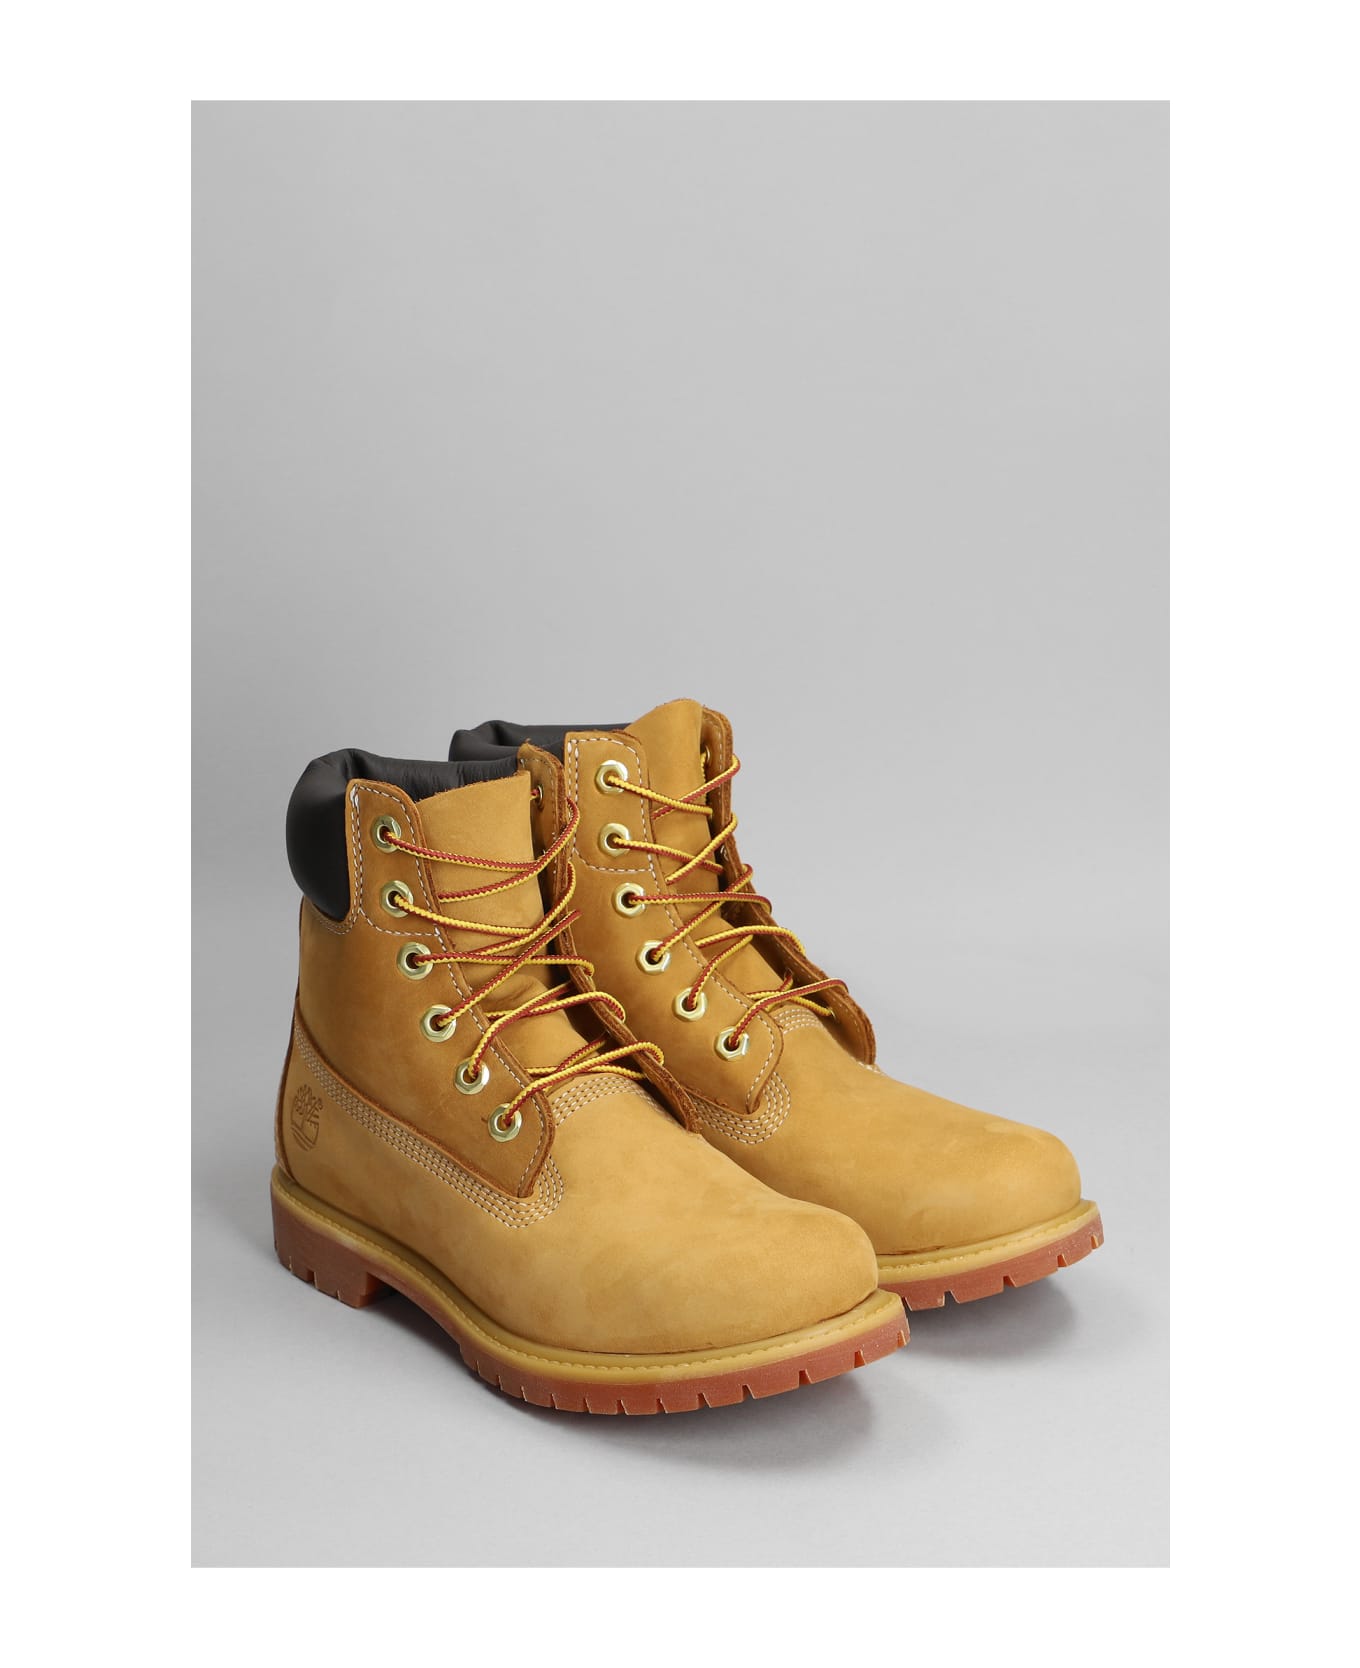 Timberland 6in Prem Combat Boots In Beige Suede - Brown ブーツ